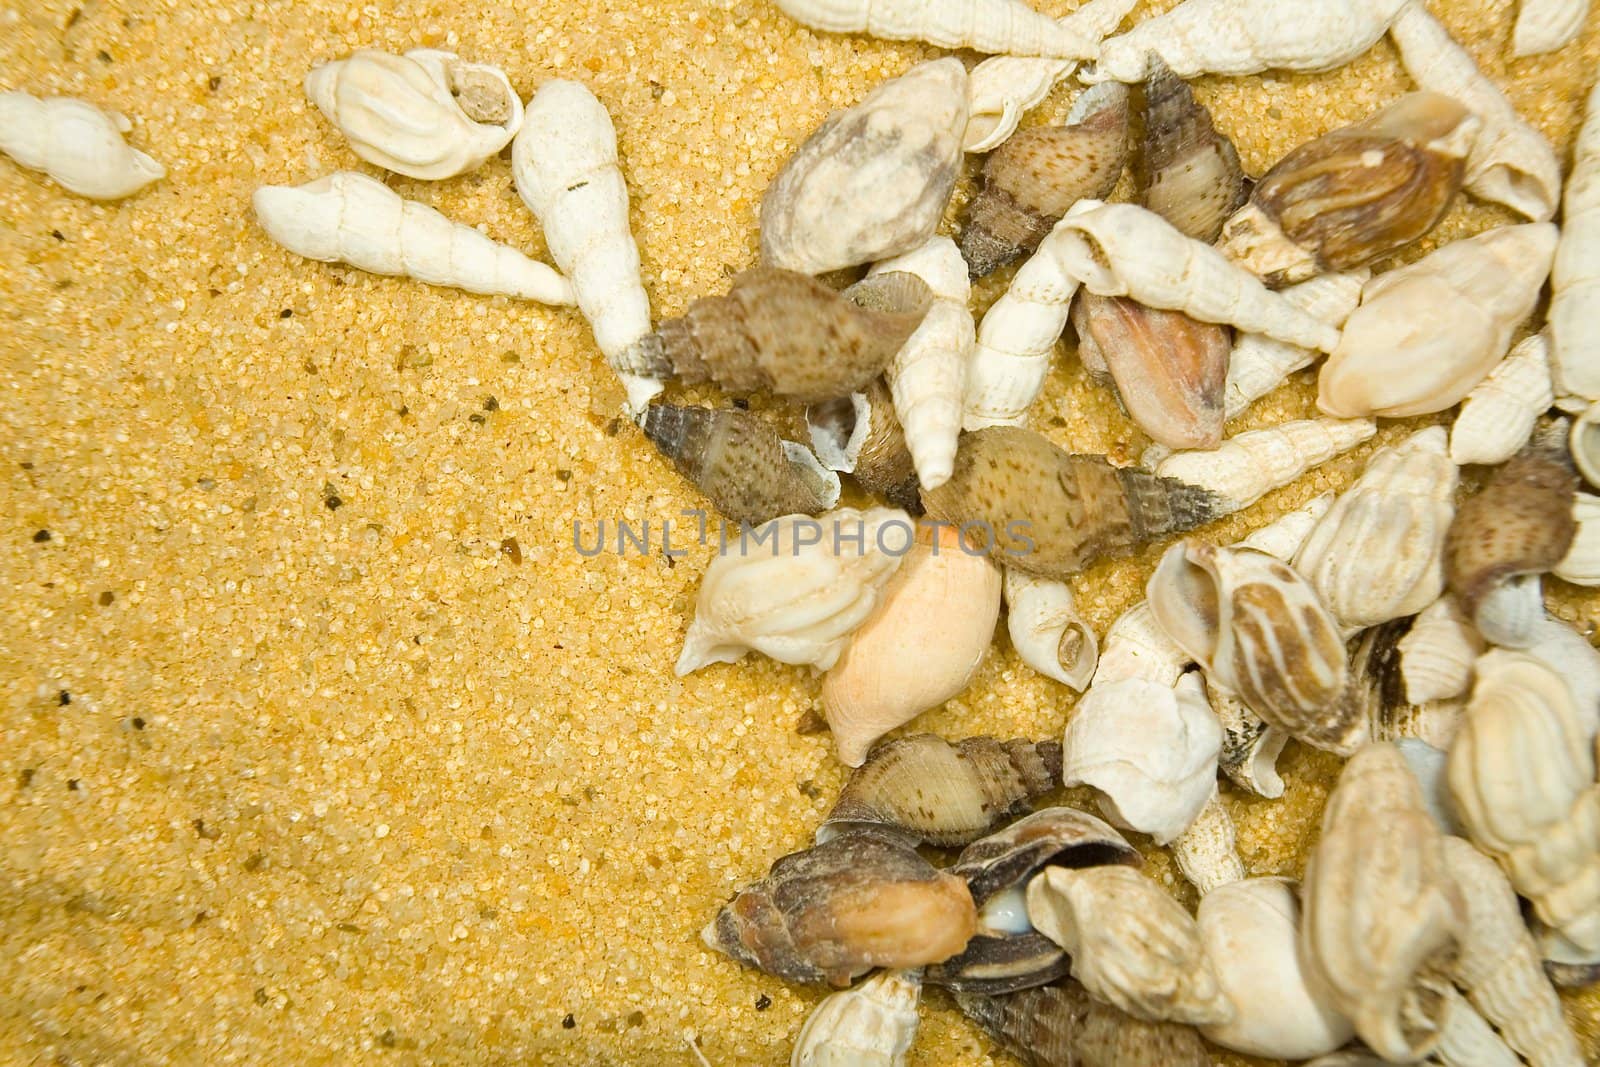 Cockleshells of sea mollusks on a sand background. Background for graphic design use.